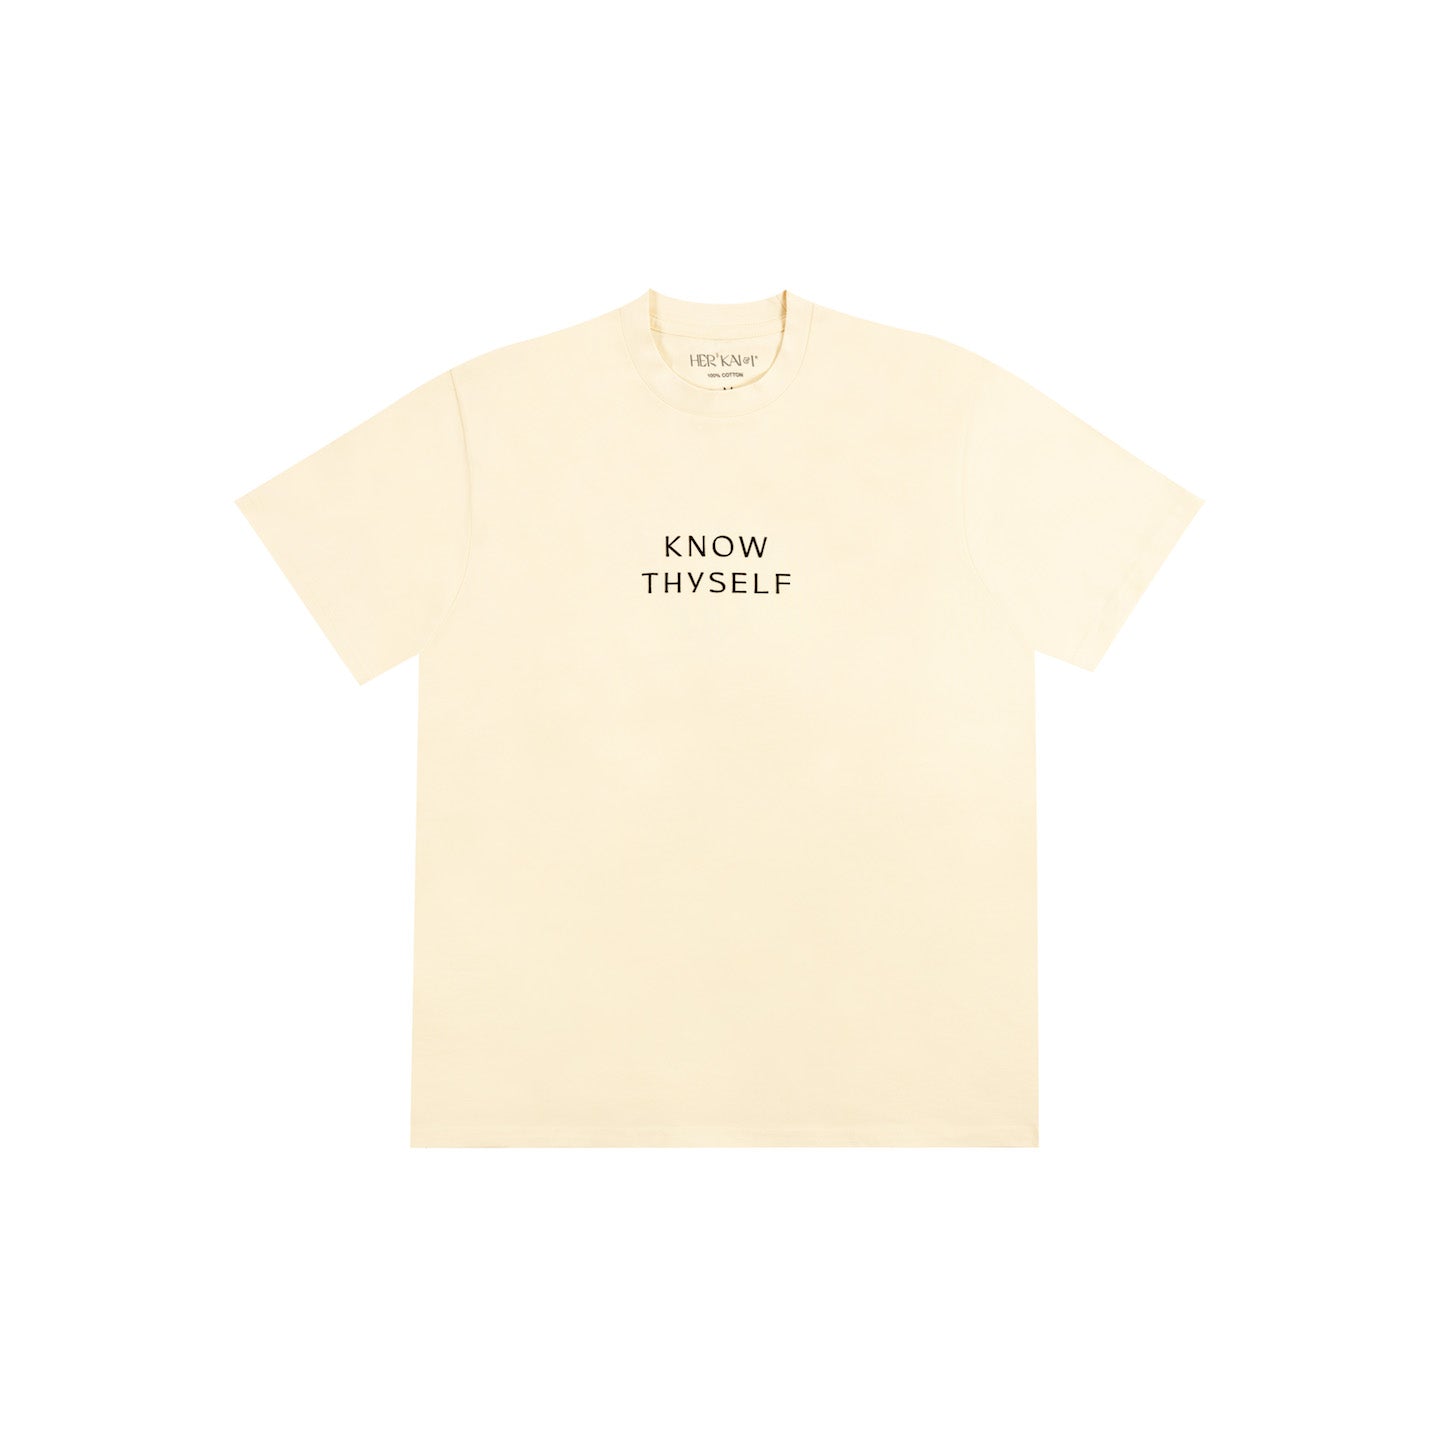 KNOW THYSELF T-SHIRT BY HER KAI & I IN CREAM COLOR